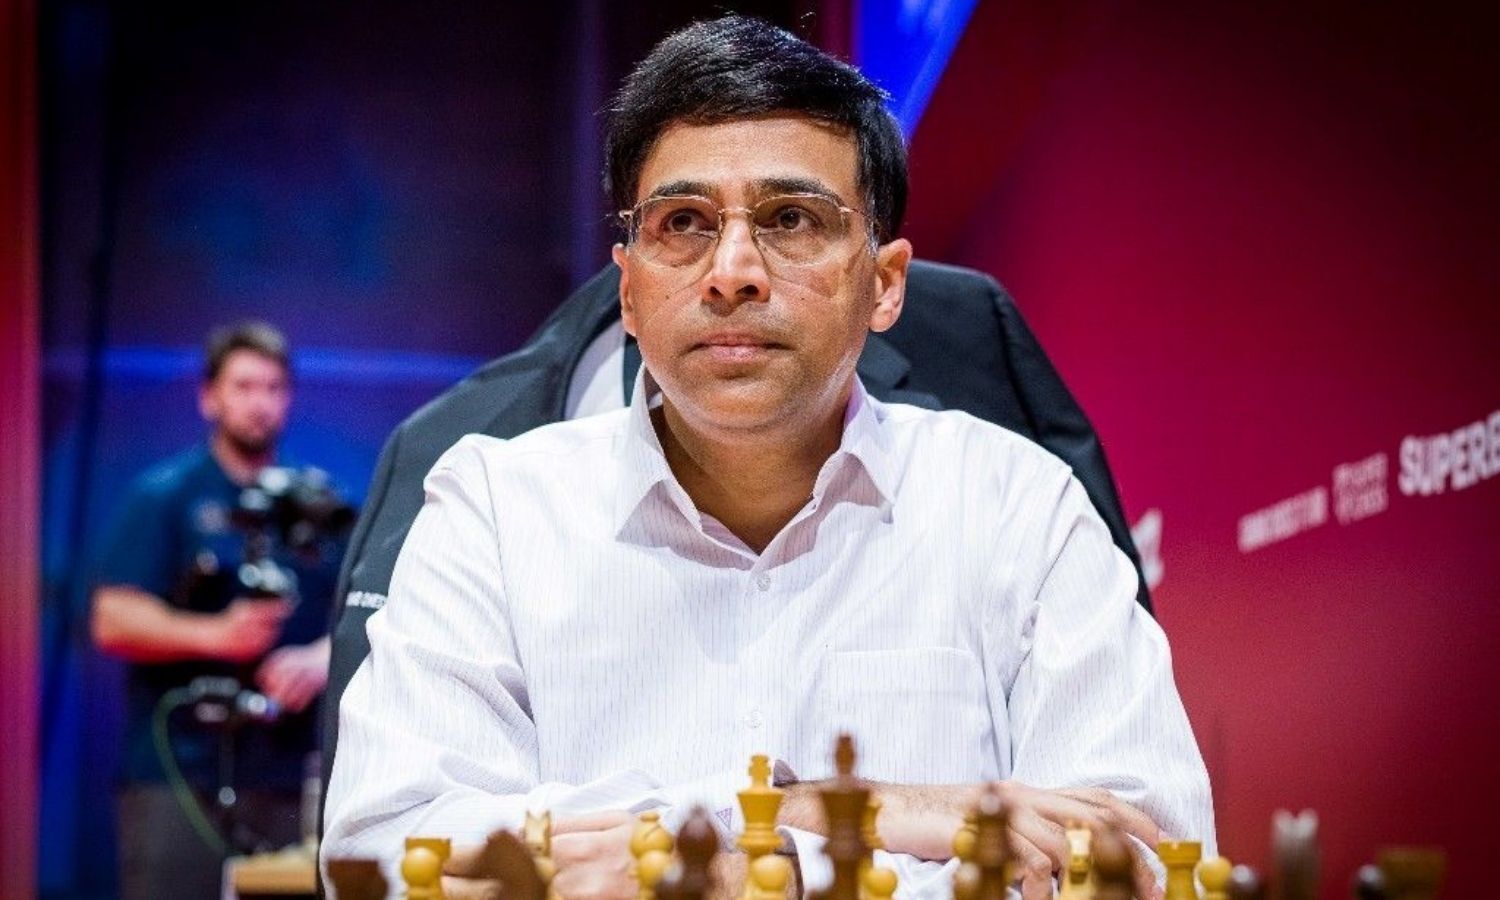 Norway Chess Blitz: Anand finishes joint second; So clinches Blitz -  ChessBase India